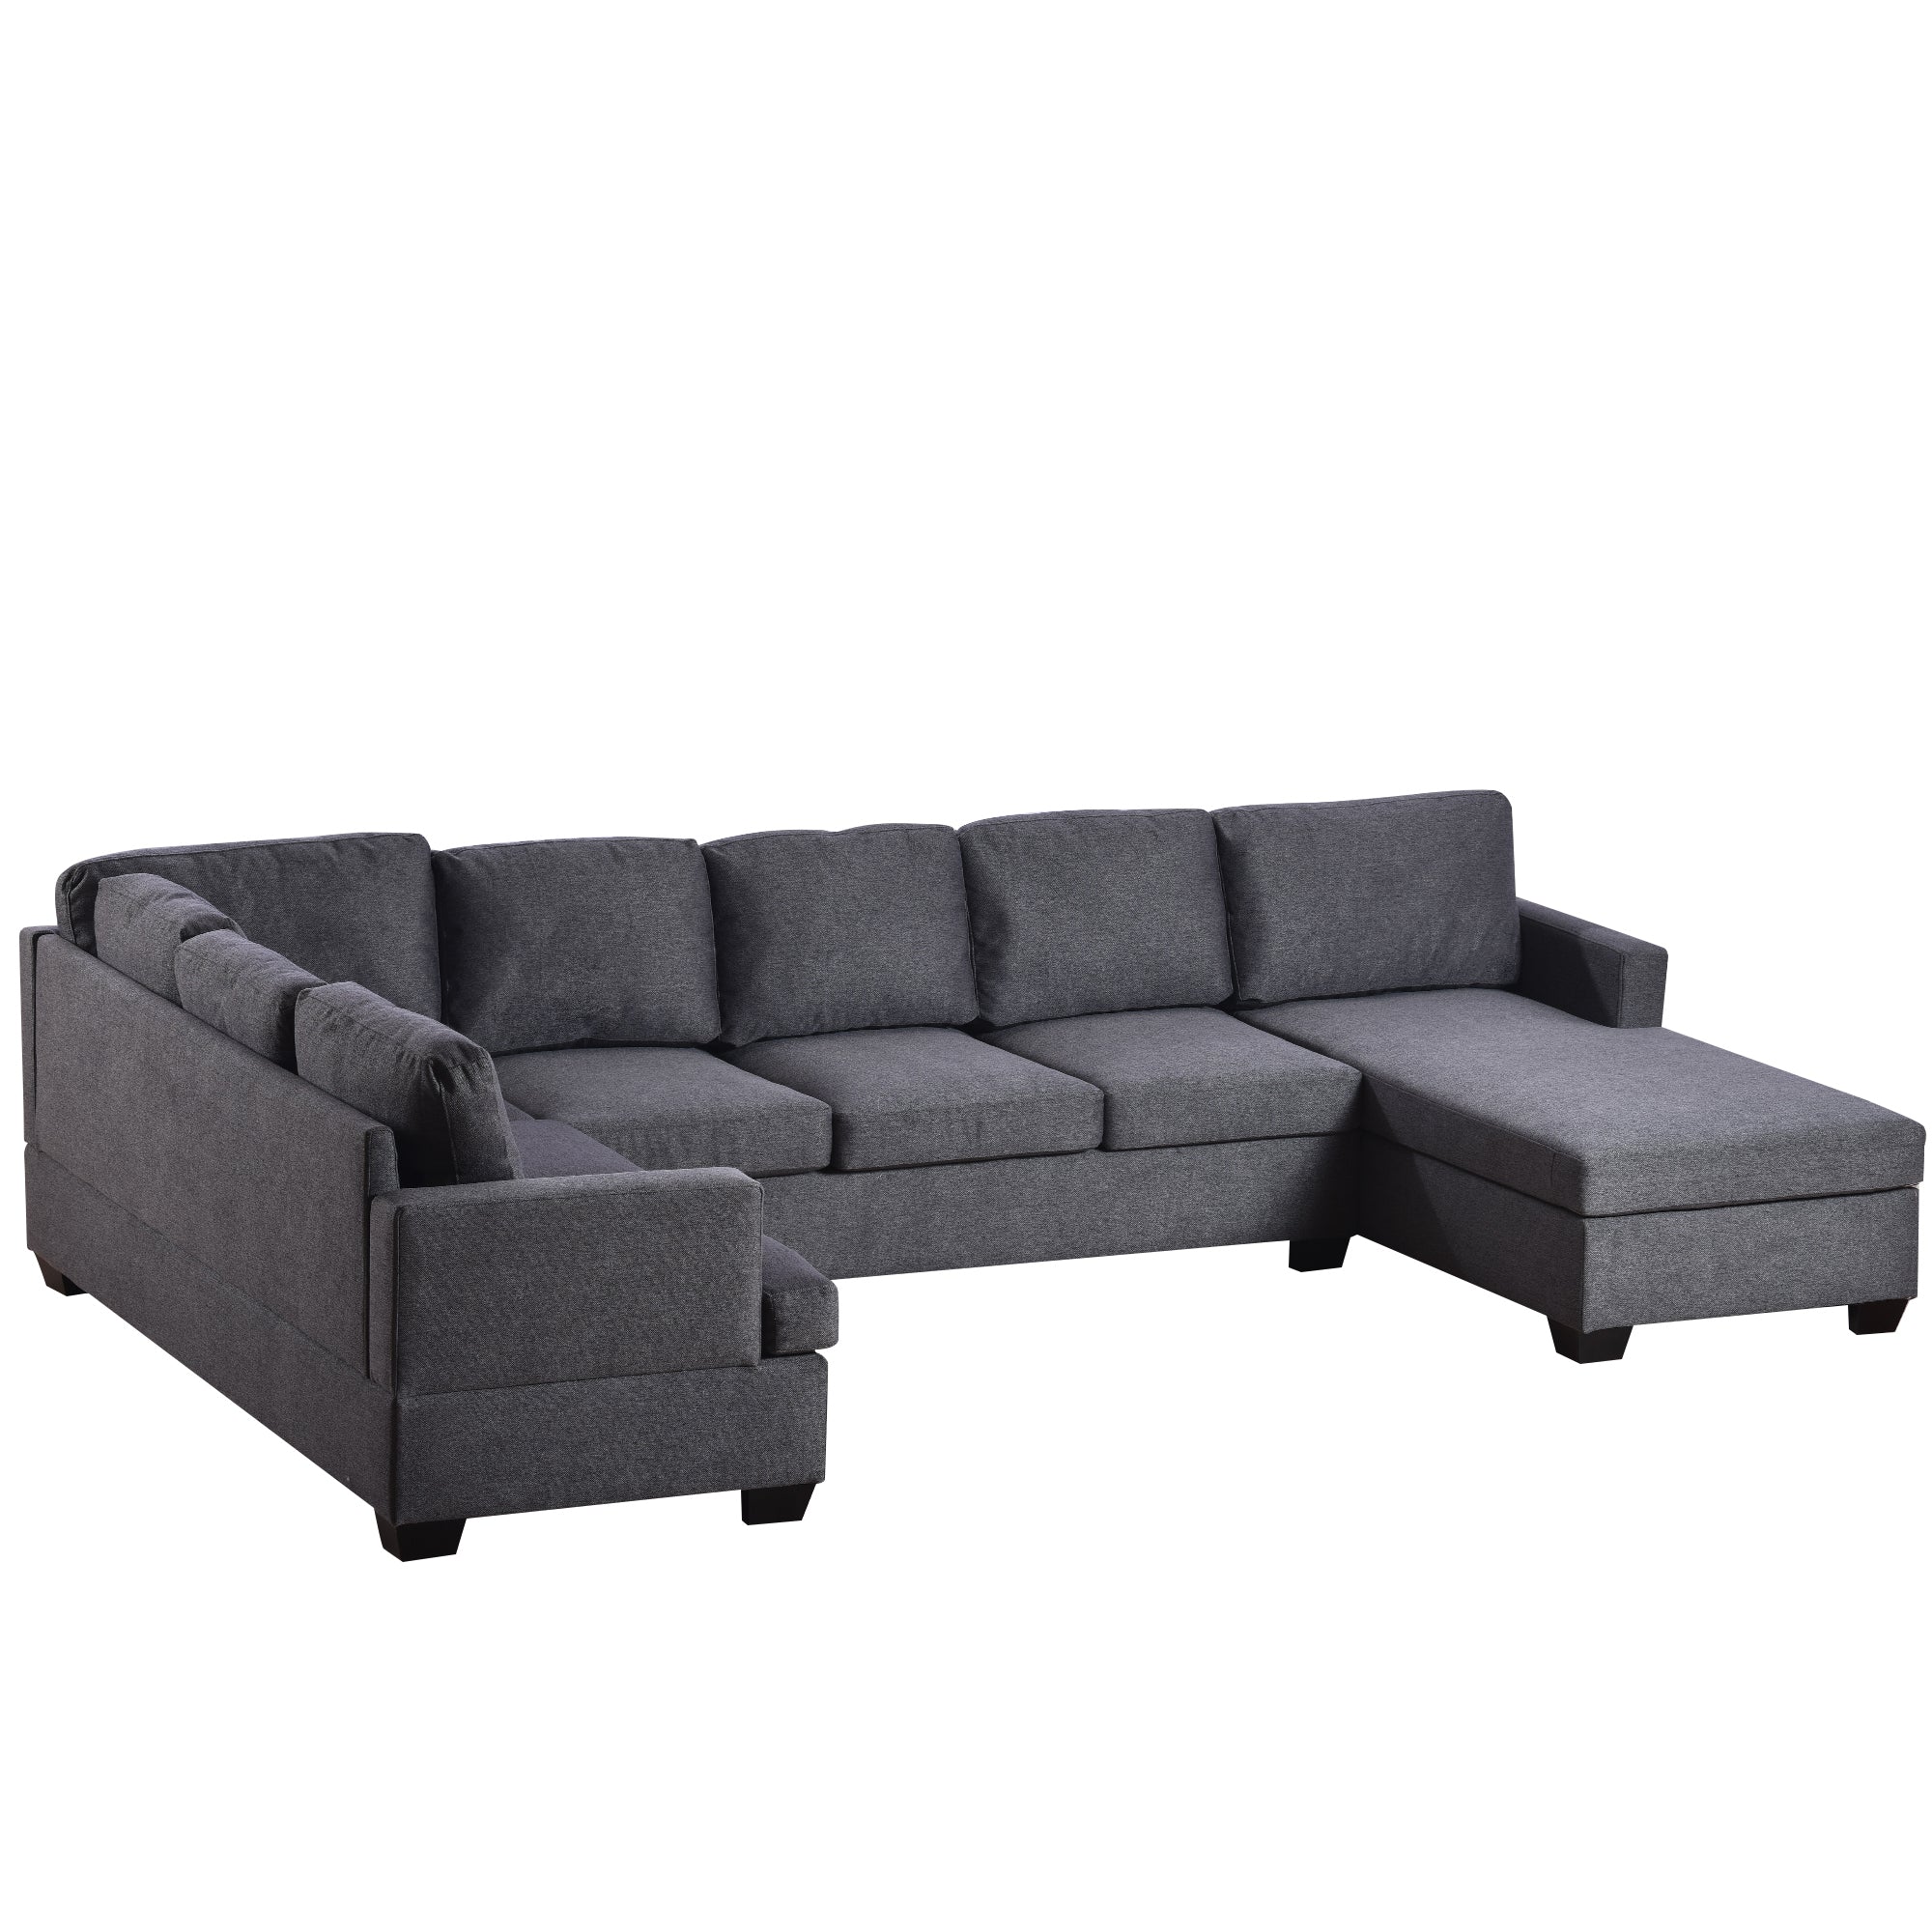 Ustyle Modern Large Upholstered  U-Shape Sectional Sofa, Extra Wide Chaise Lounge Couch,  Grey